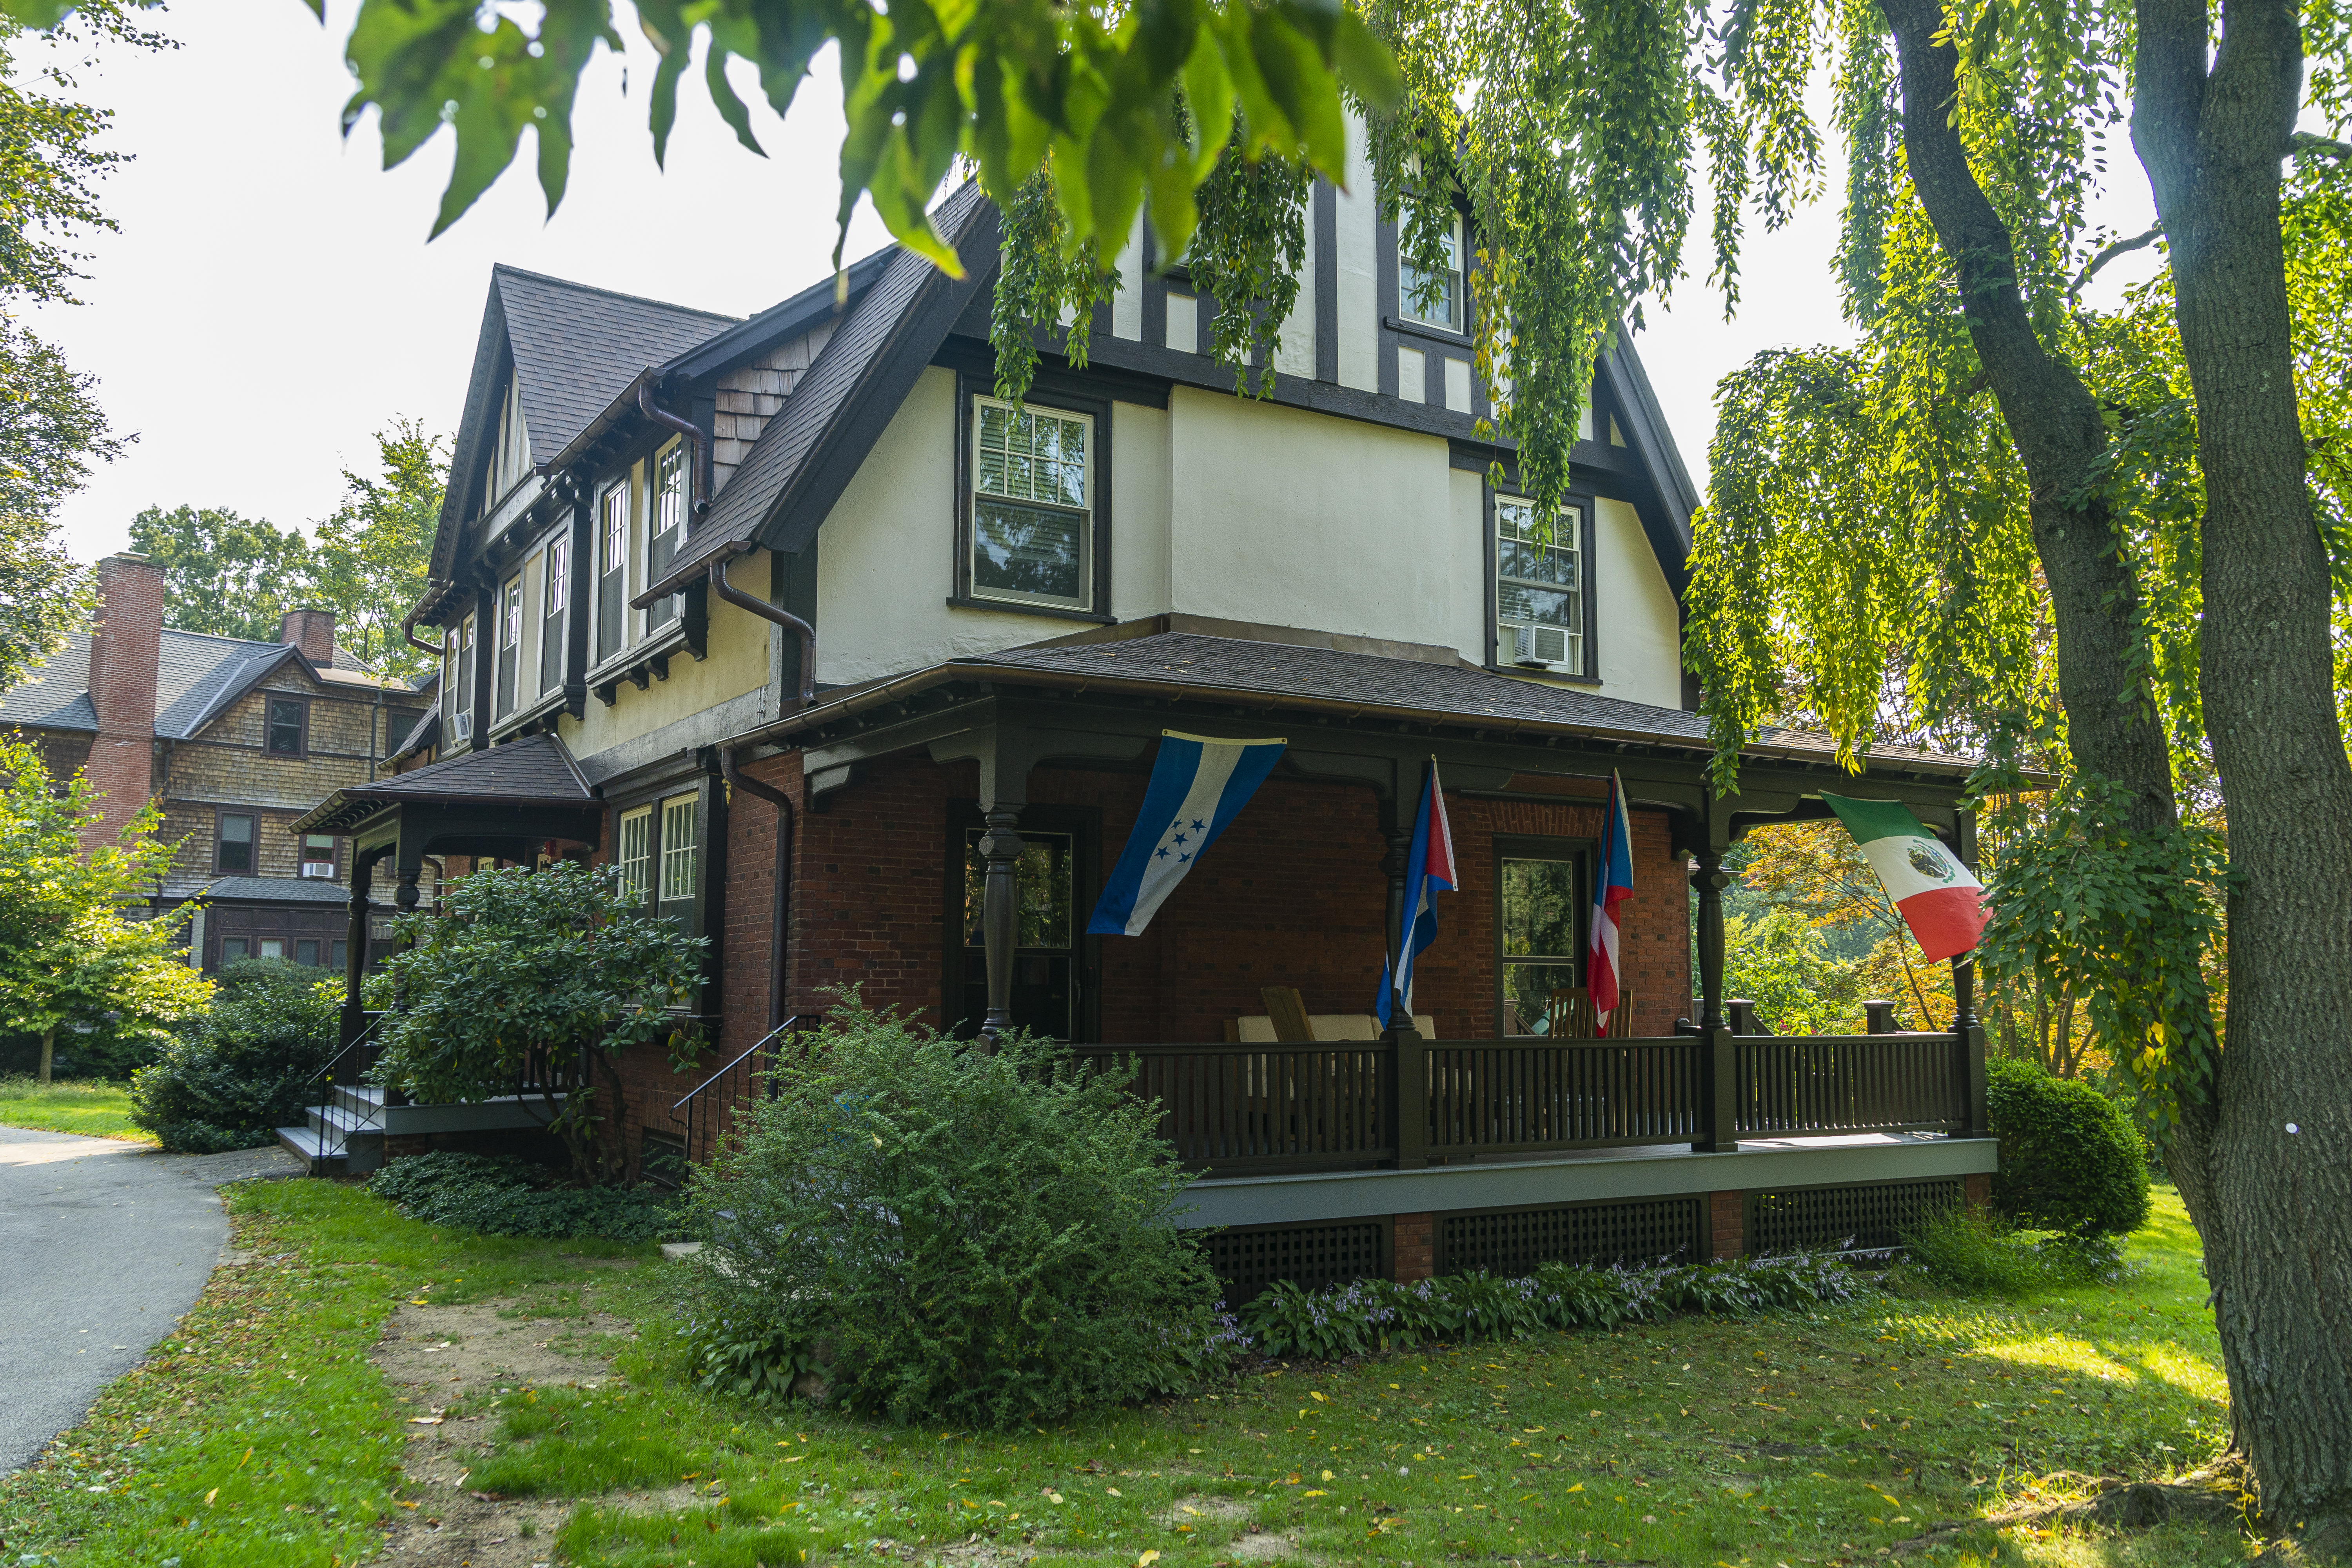 The outside of the tudor-style house where the Latinx Center is located